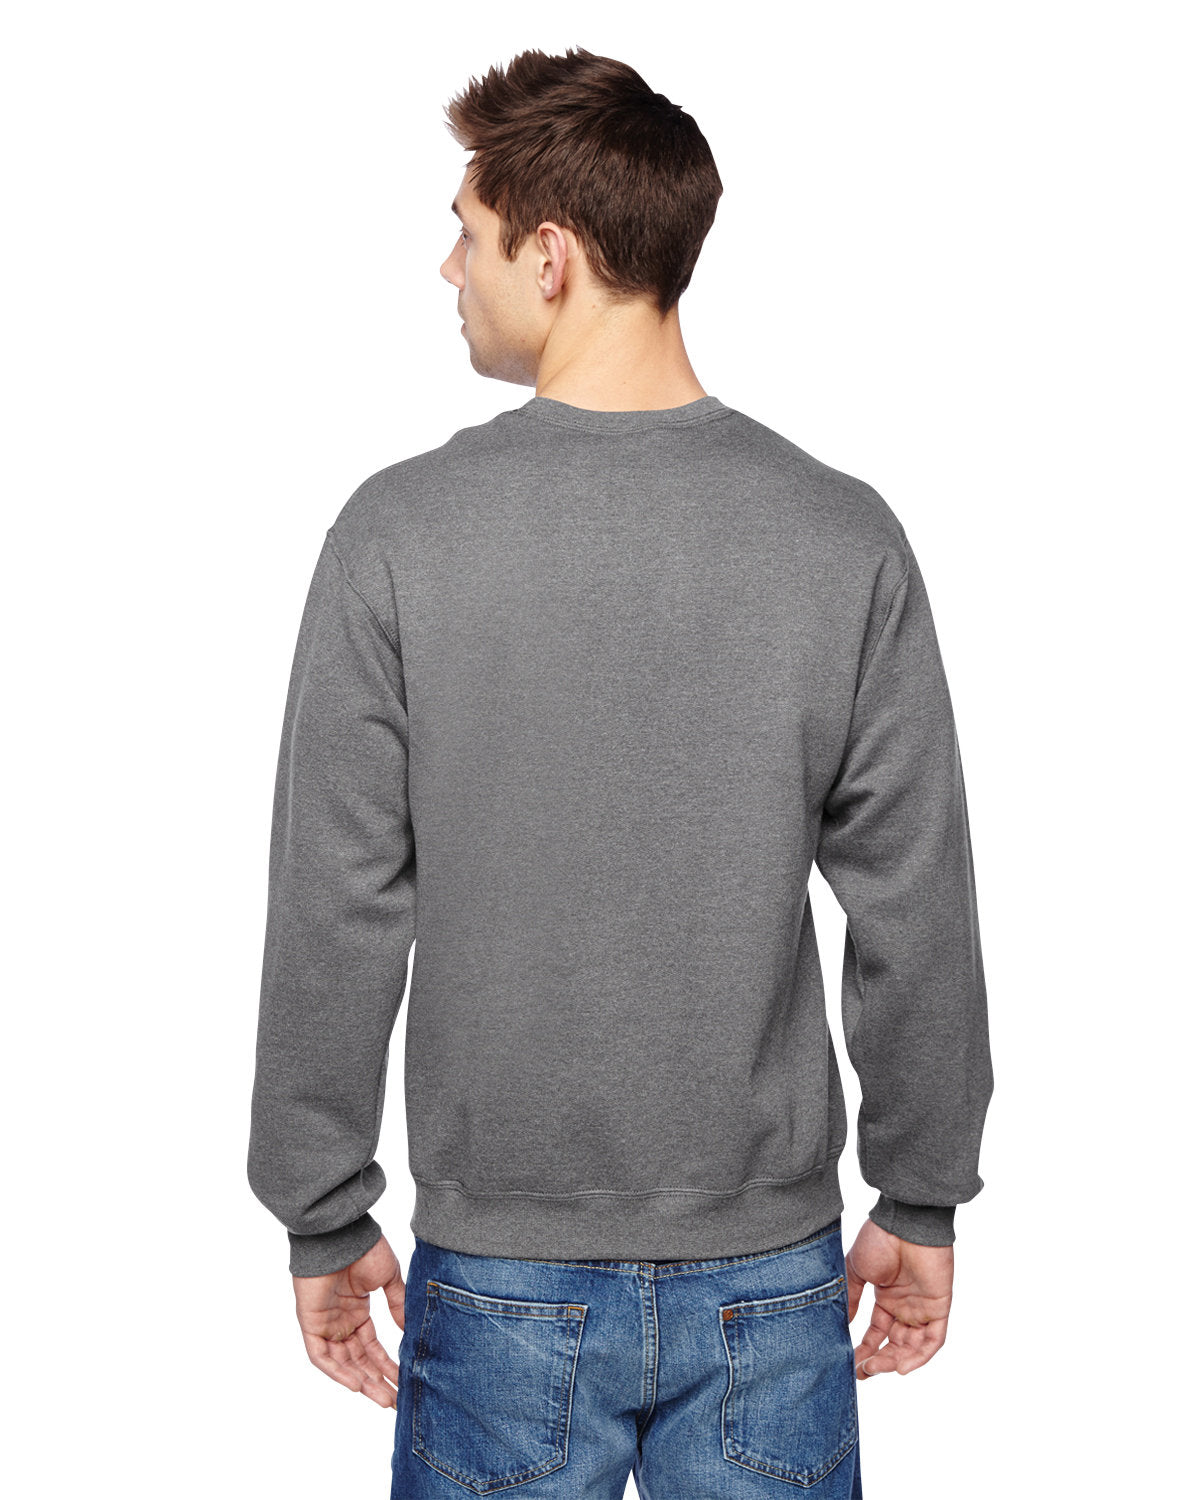 SF72R-Fruit of the Loom-CHARCOAL HEATHER